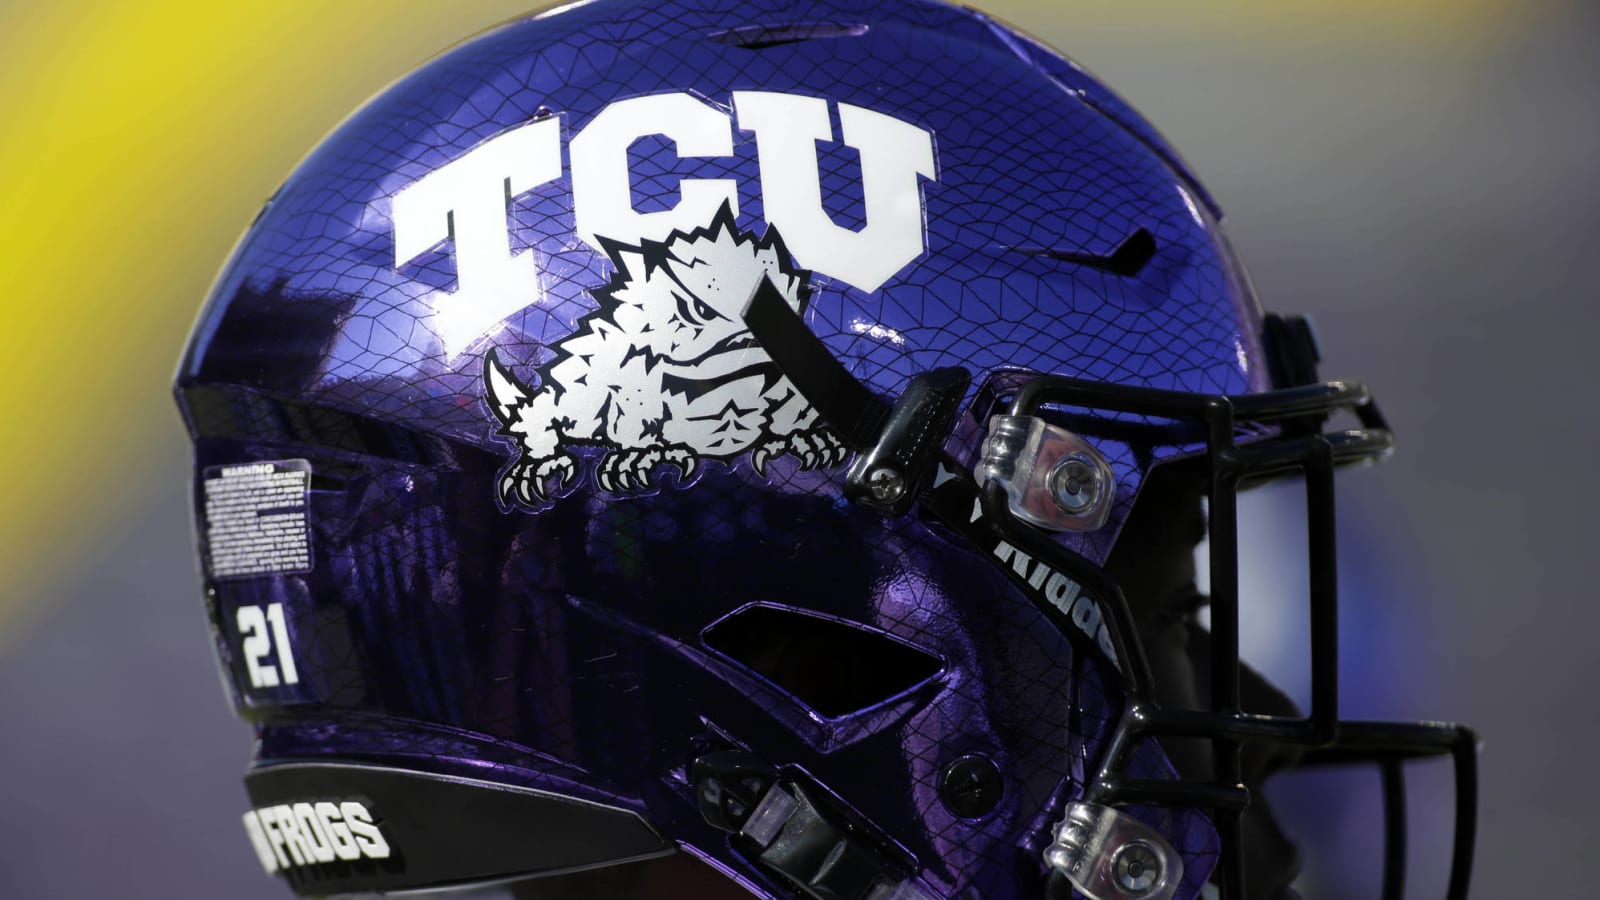 TCU-SMU football game postponed due to positive COVID tests